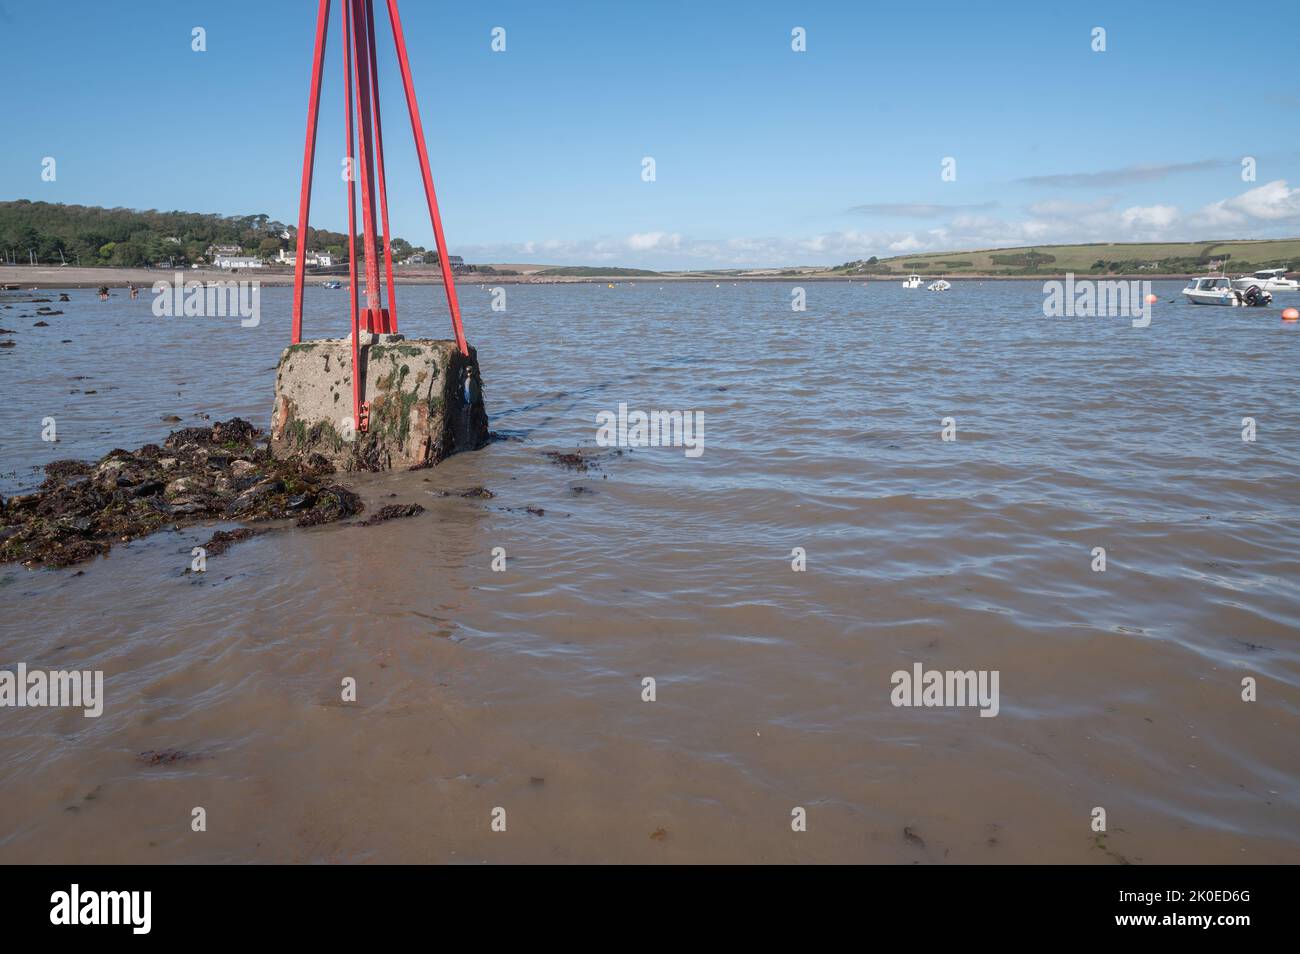 Outfall from waste water treatmnet works discharging into Dale Bay, Pembrokeshire, Wales, UK Stock Photo